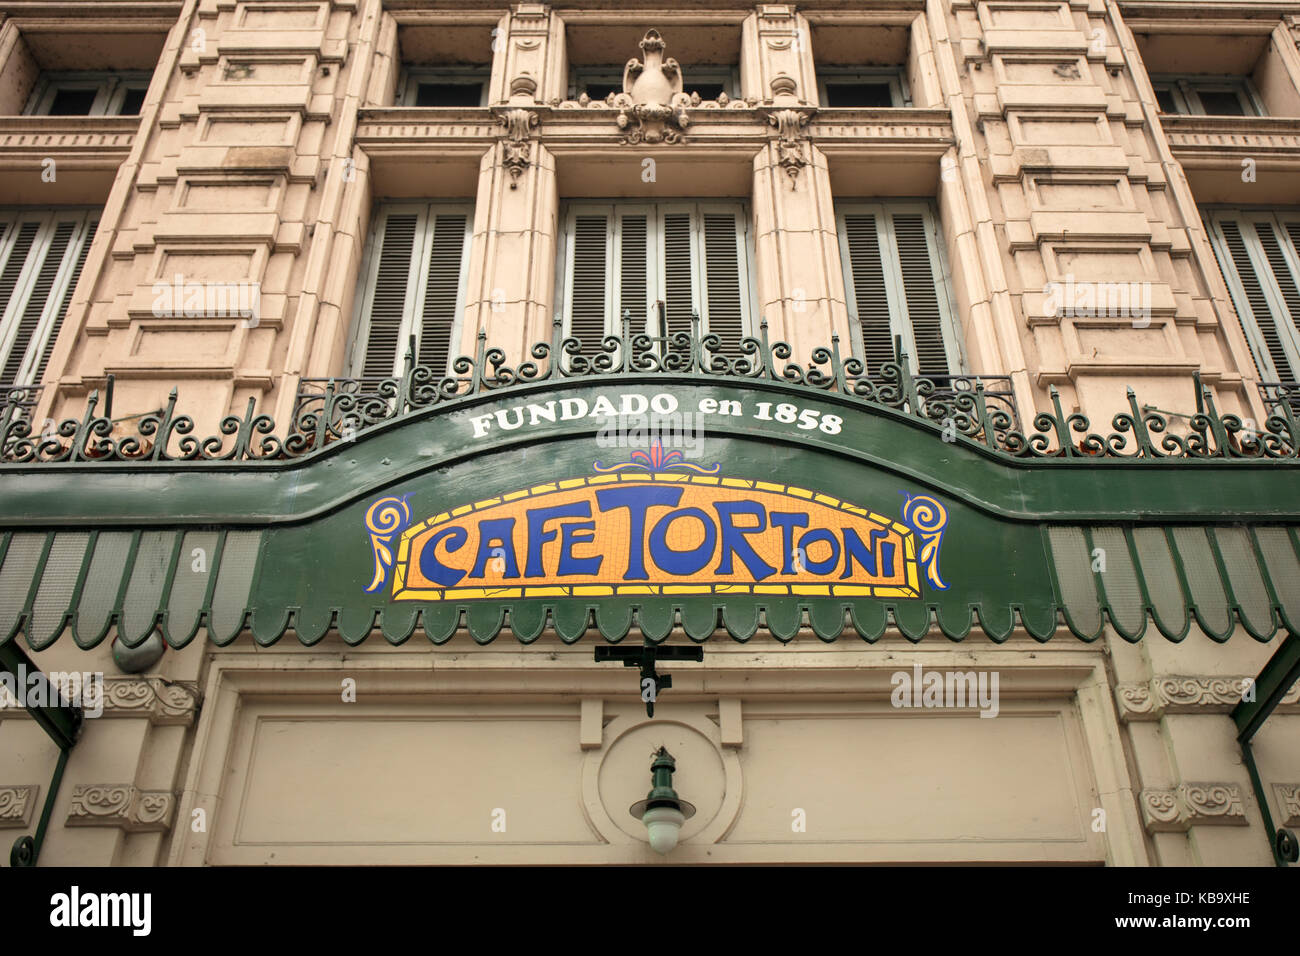 The ensign at the entrance of the historical 'Cafe Tortoni' on Avenida de Mayo. Buenos Aires, Argentina. Stock Photo